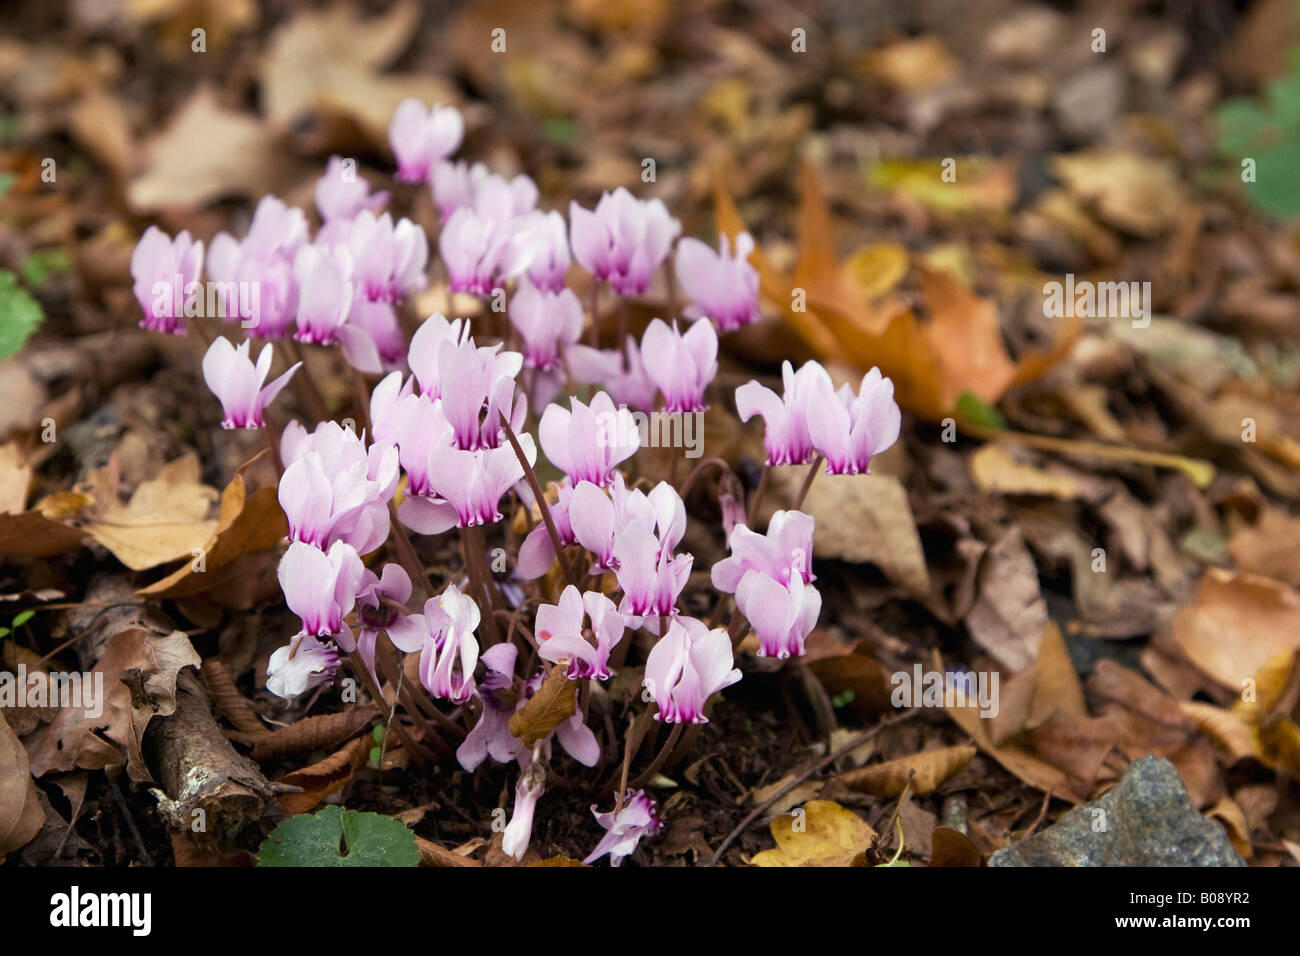 Persian Violets or Sowbread (Cyclamen persicum), Greece, Europe Stock Photo